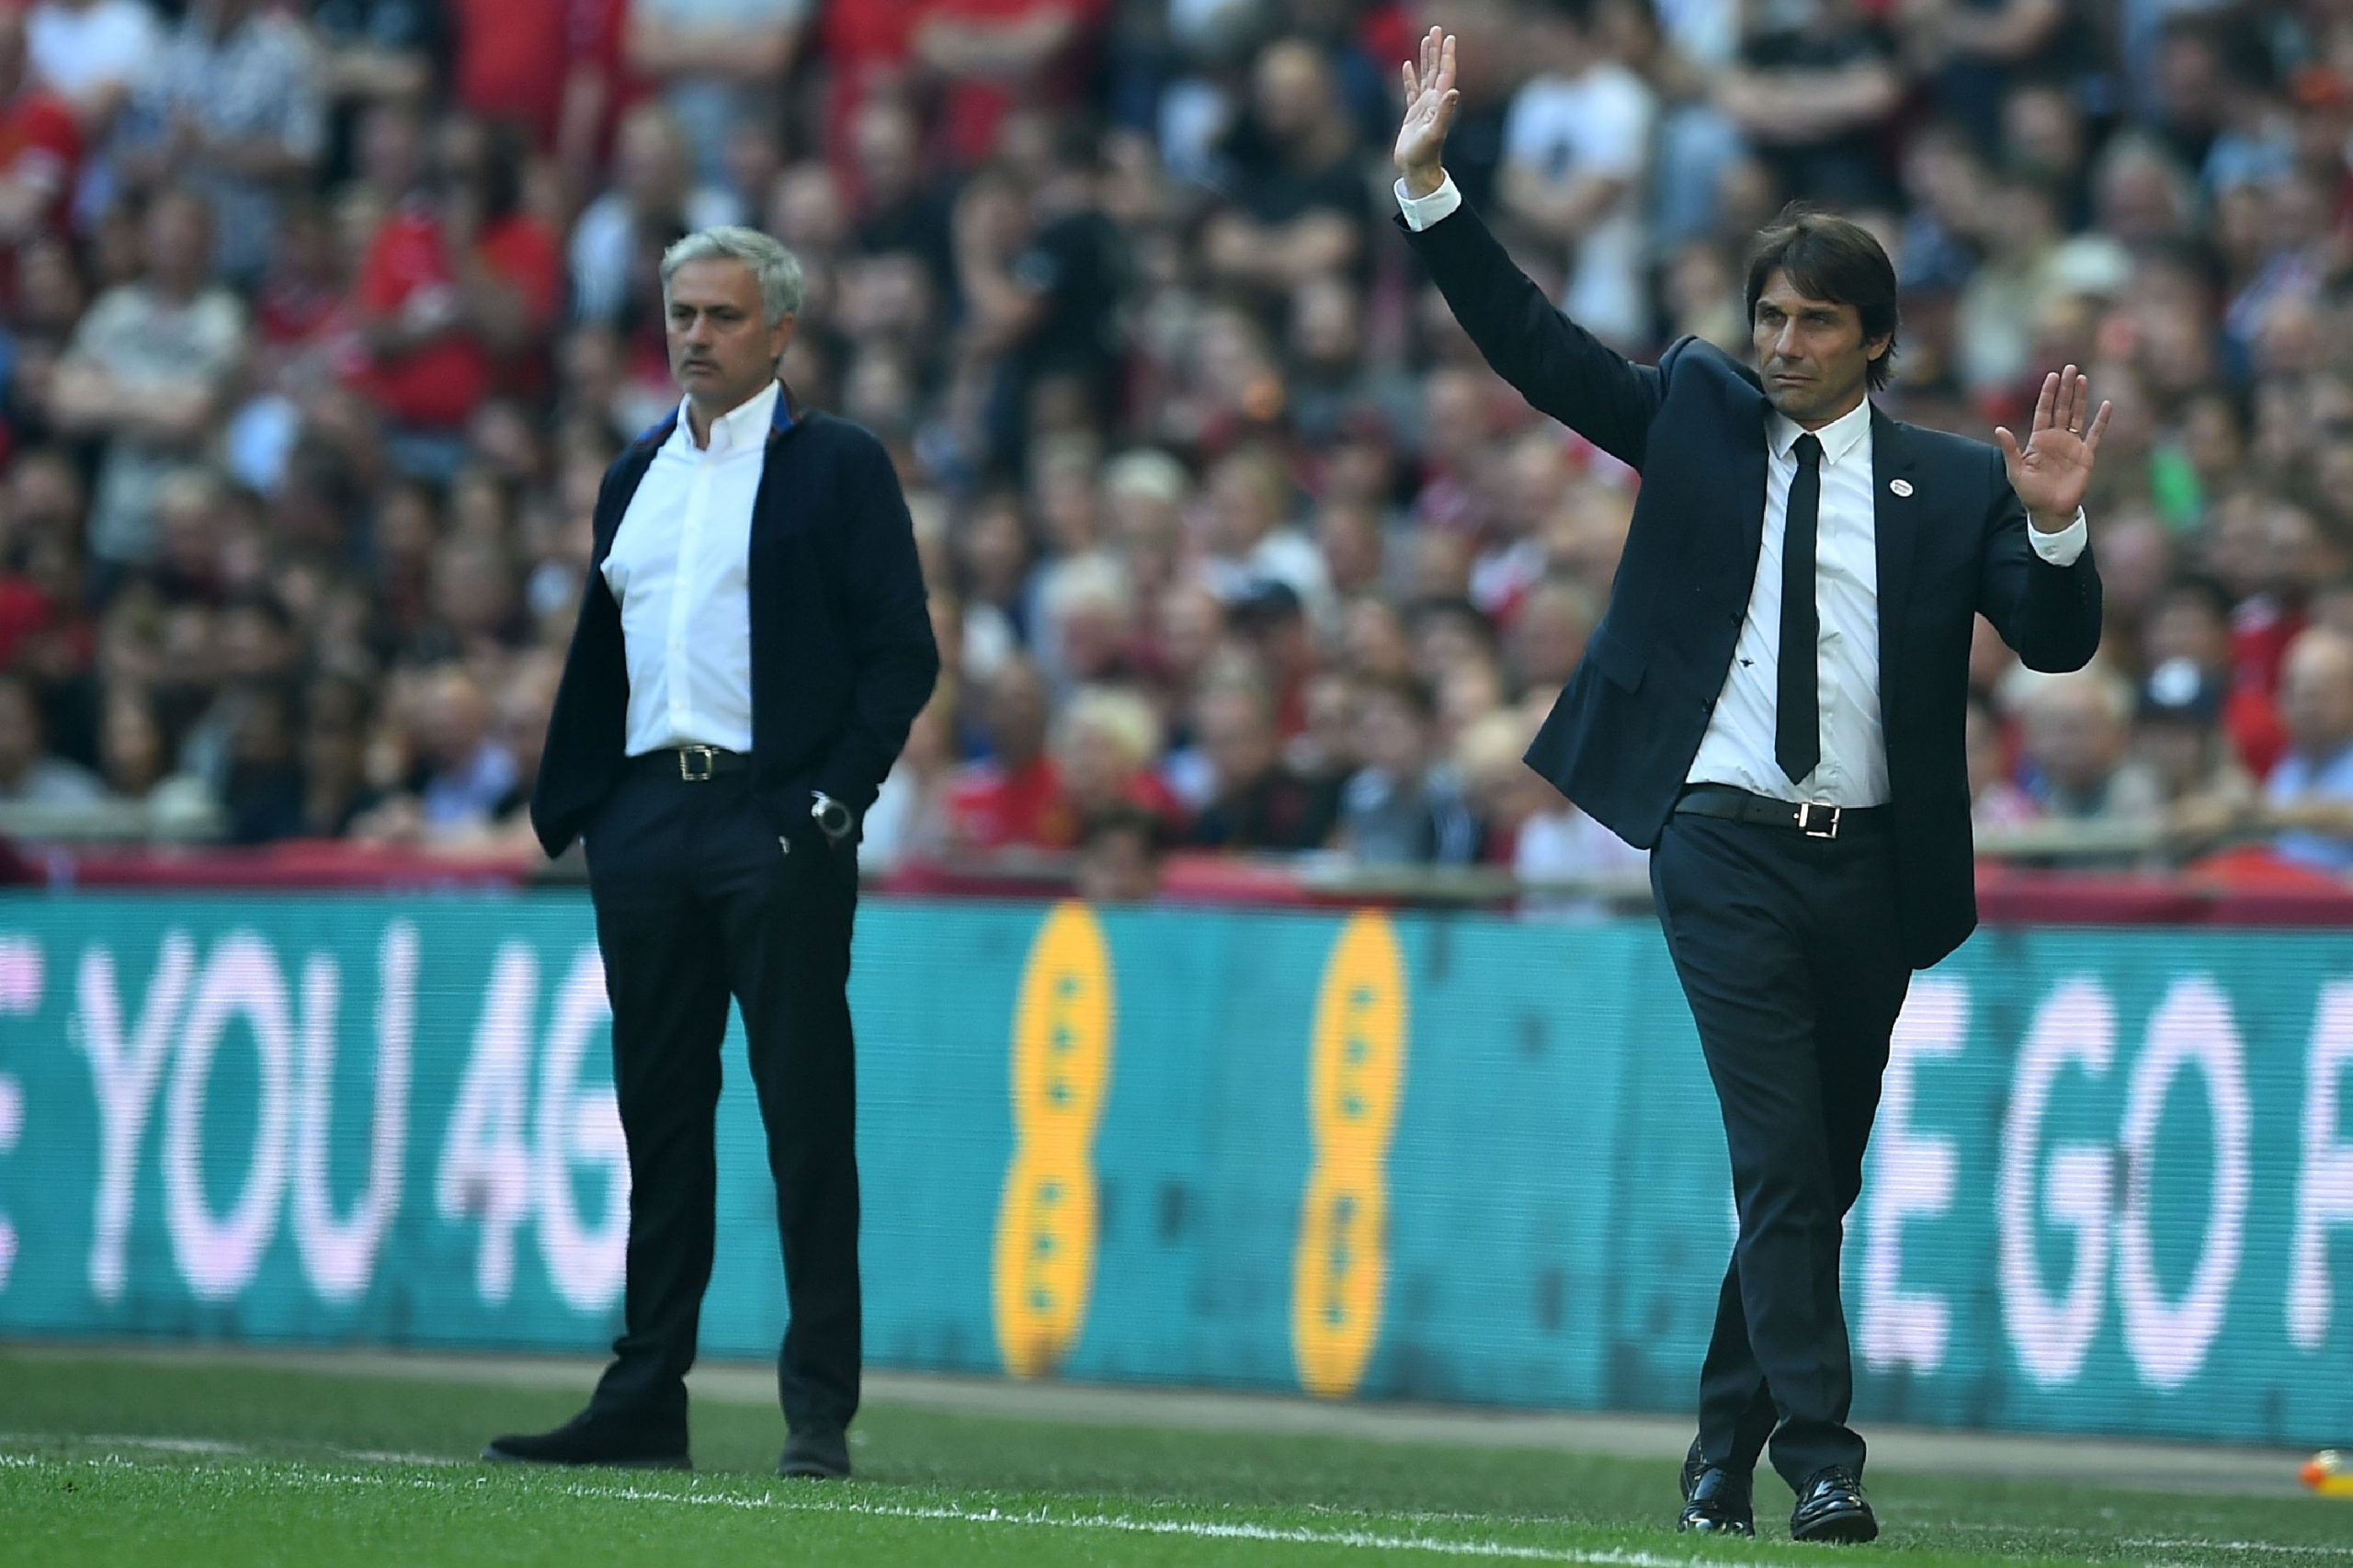 Antonio Conte and Jose Mourinho during a game between Chelsea and Manchester United.